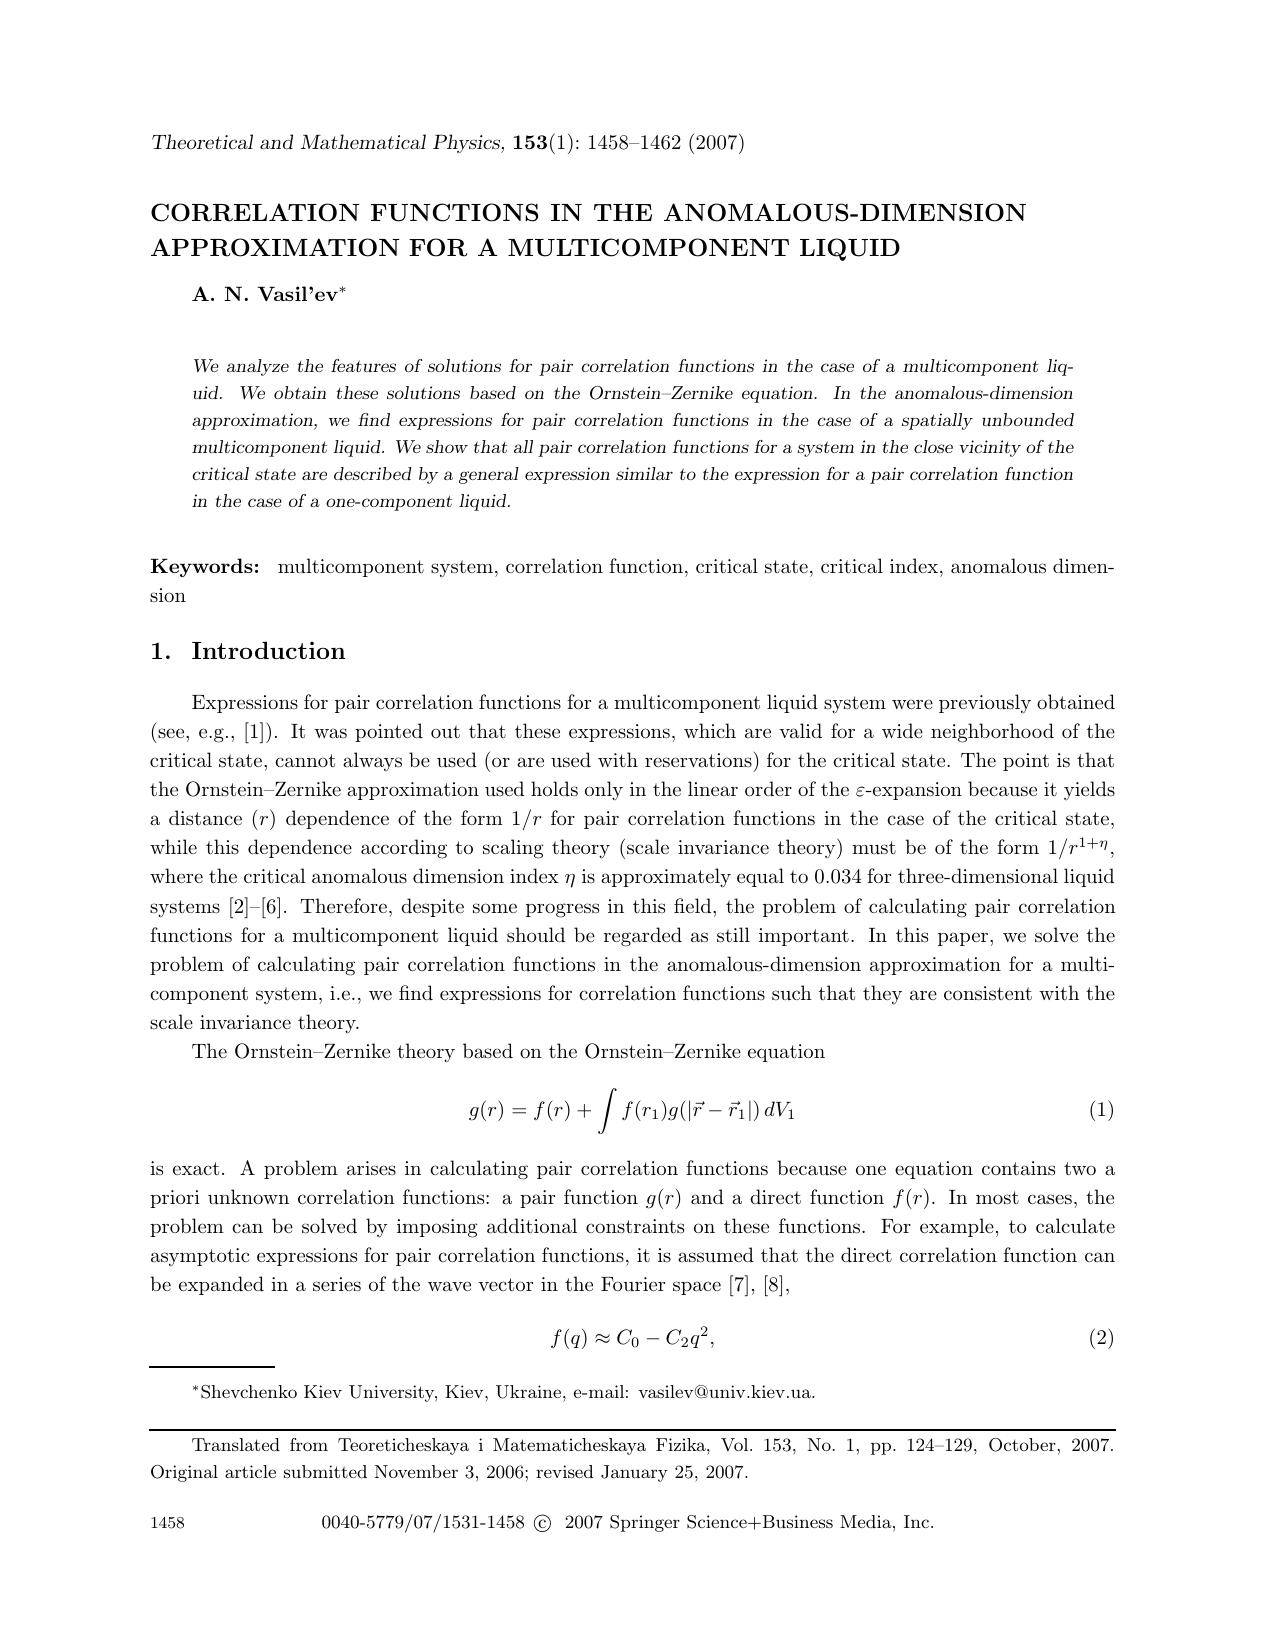 Correlation functions in the anomalous-dimension approximation for a multicomponent liquid by Unknown